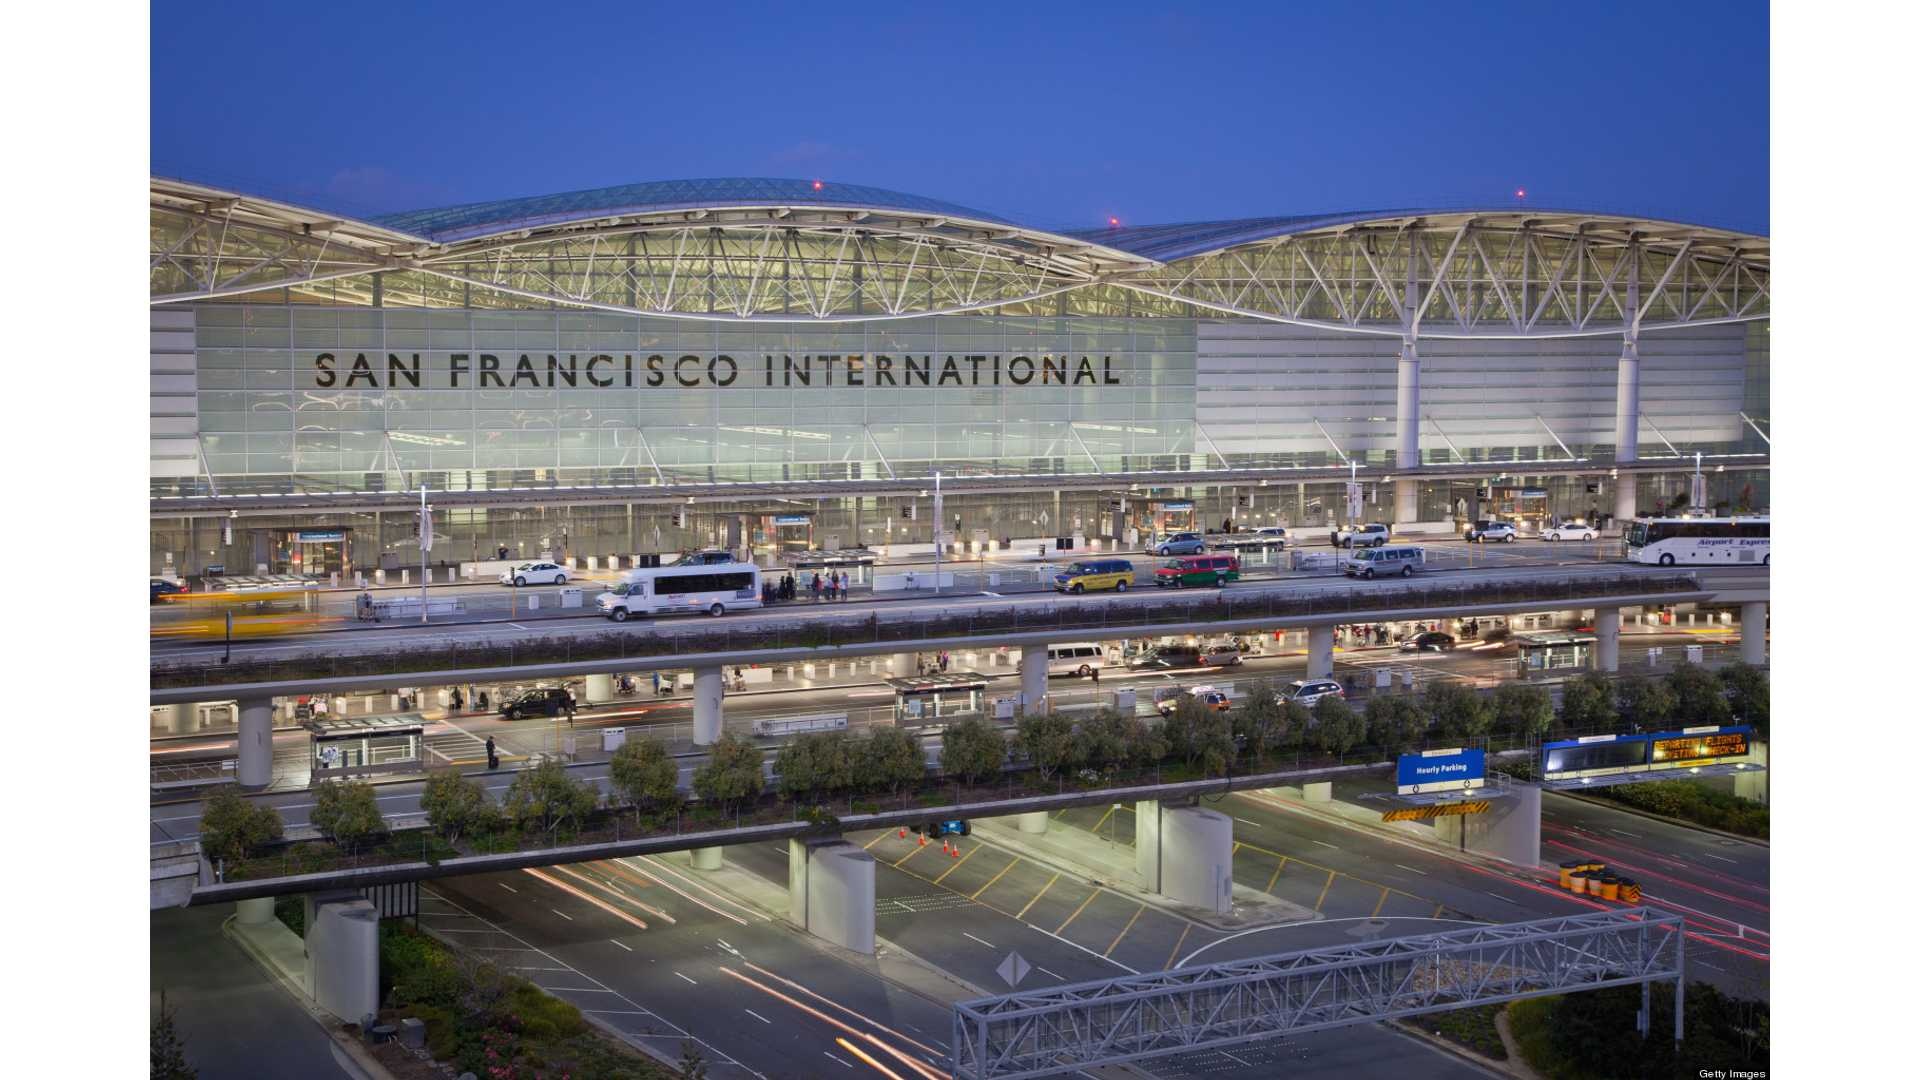 San Francisco Airport, Charging stations, InsideEVs photos, DC fast chargers, 1920x1080 Full HD Desktop